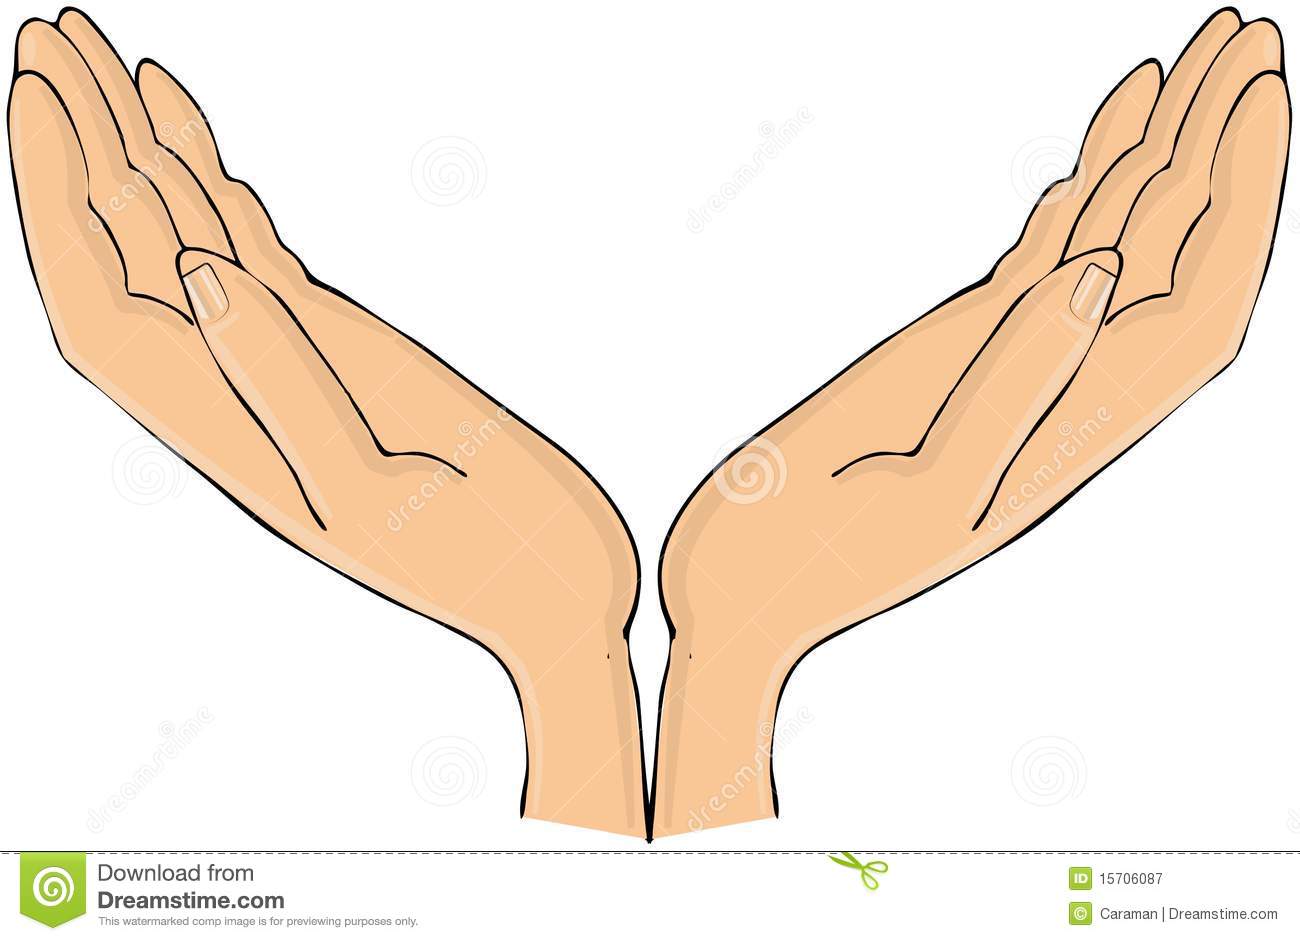 This Illustration Depicts A Pair Of Human Hands Open Palmed Facing Up